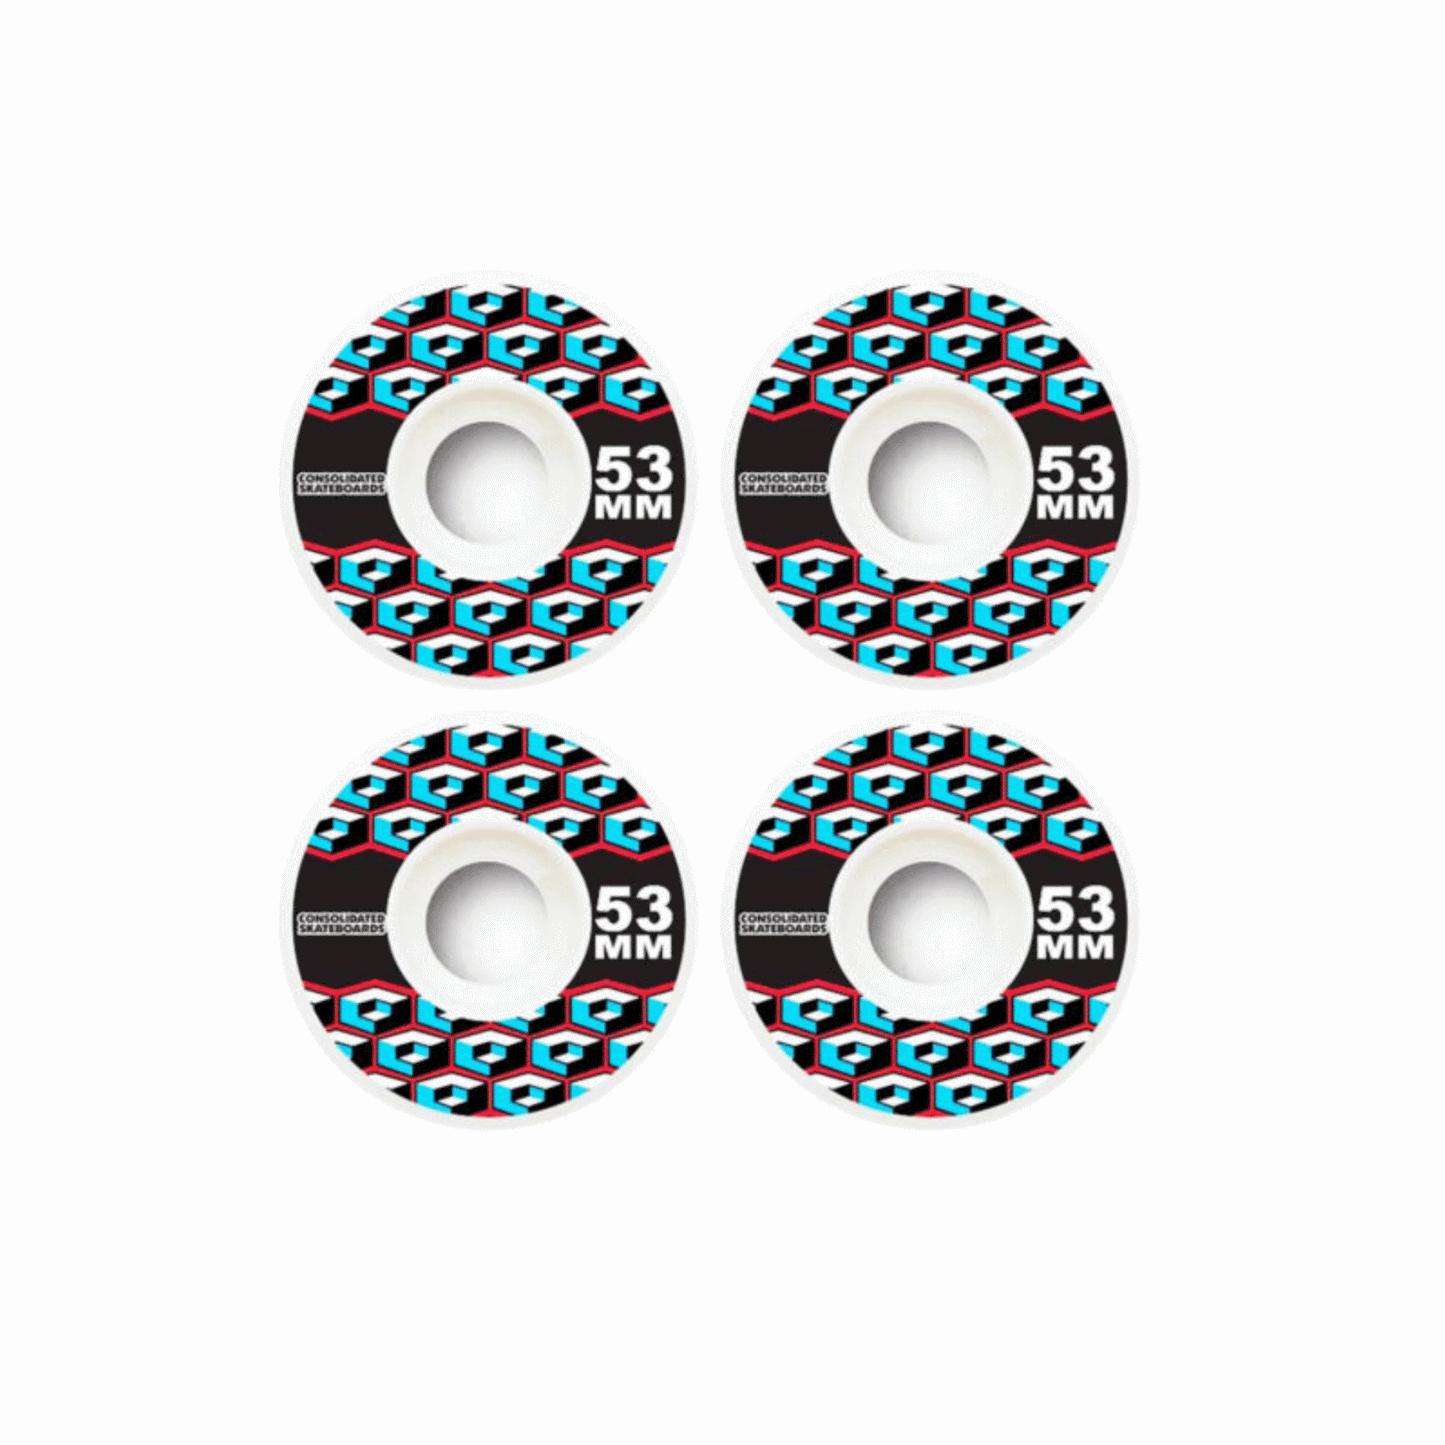 CONSOLIDATED - Cracked Cube Wheels - 53mm 99a